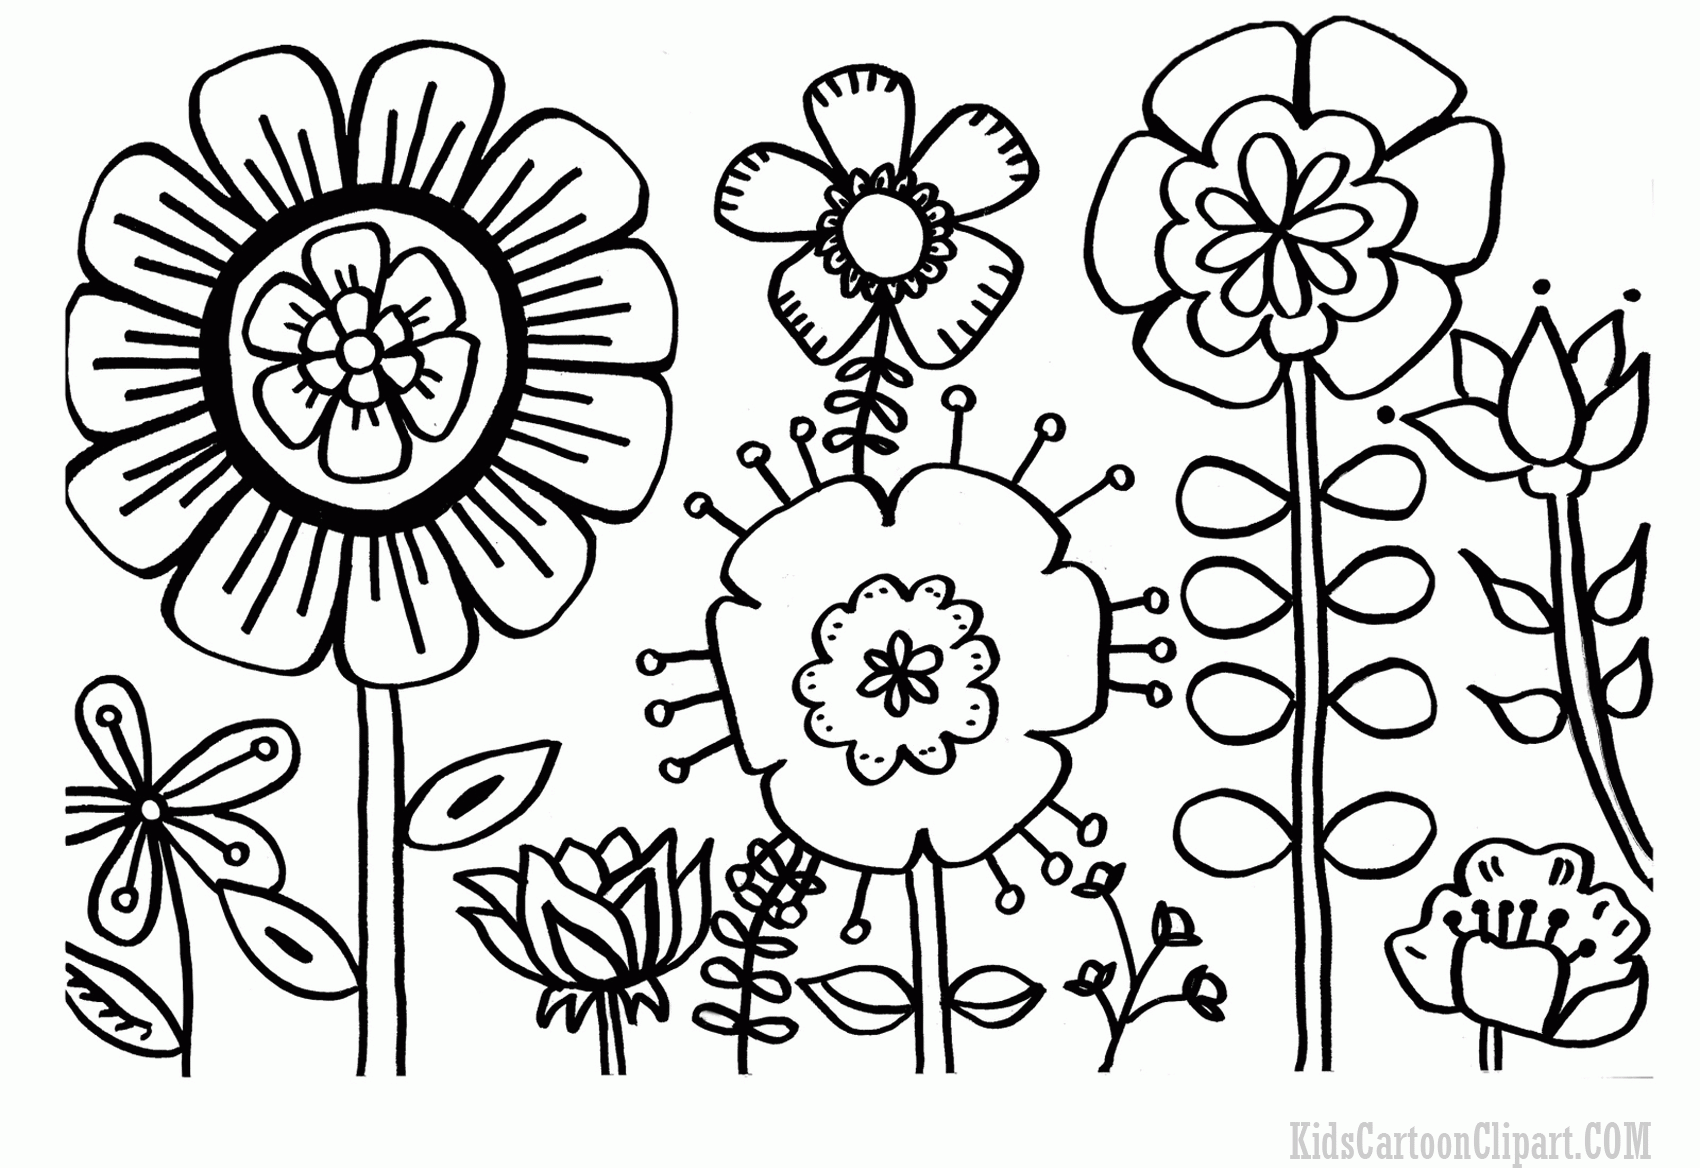 Flowers Garden Coloring Pages for School Kids Cartoon Clipart ...